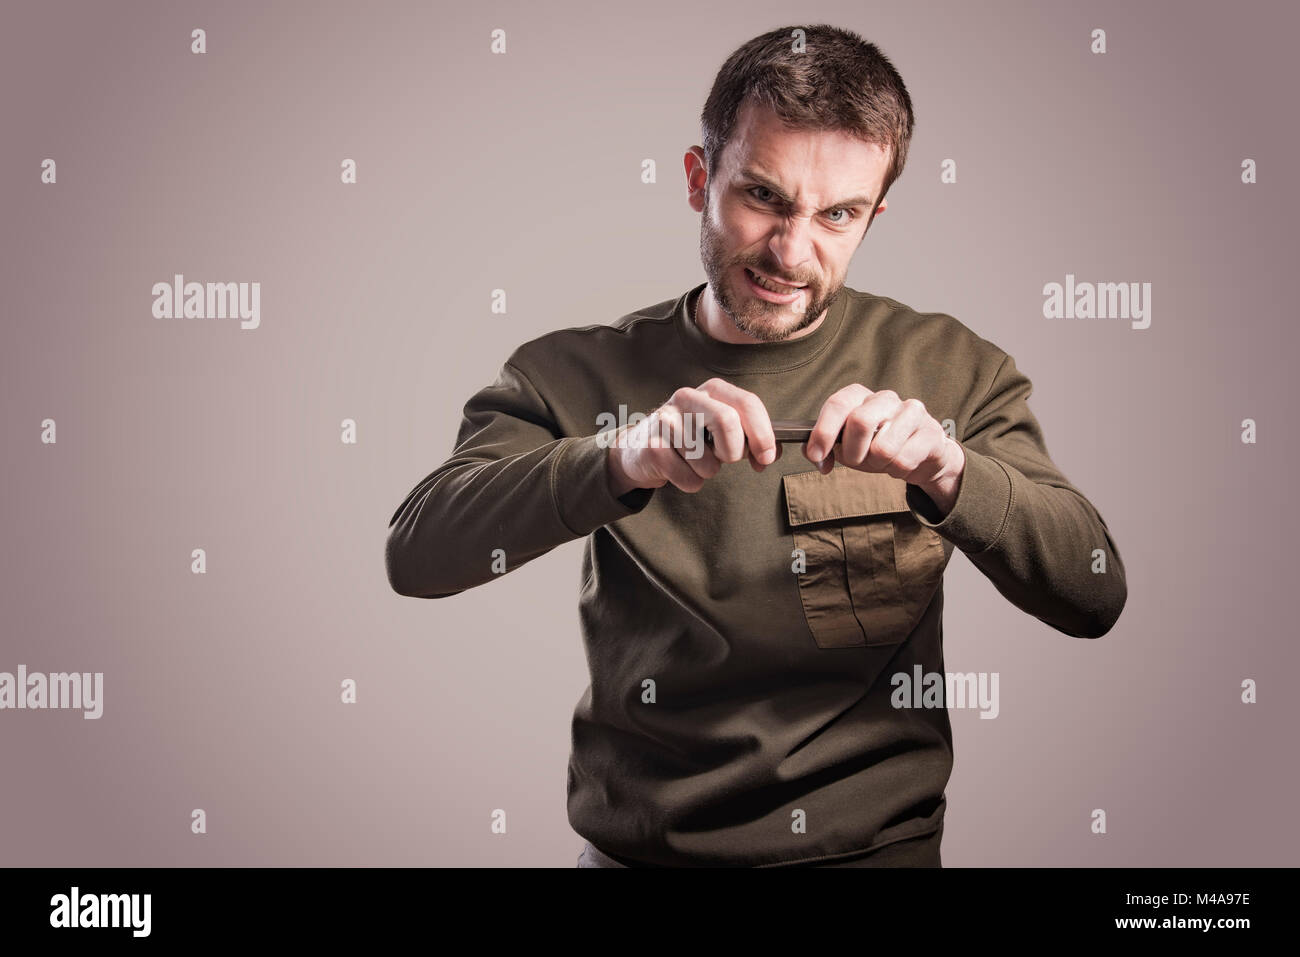 Man angry at his phone, outraged and enraged Stock Photo